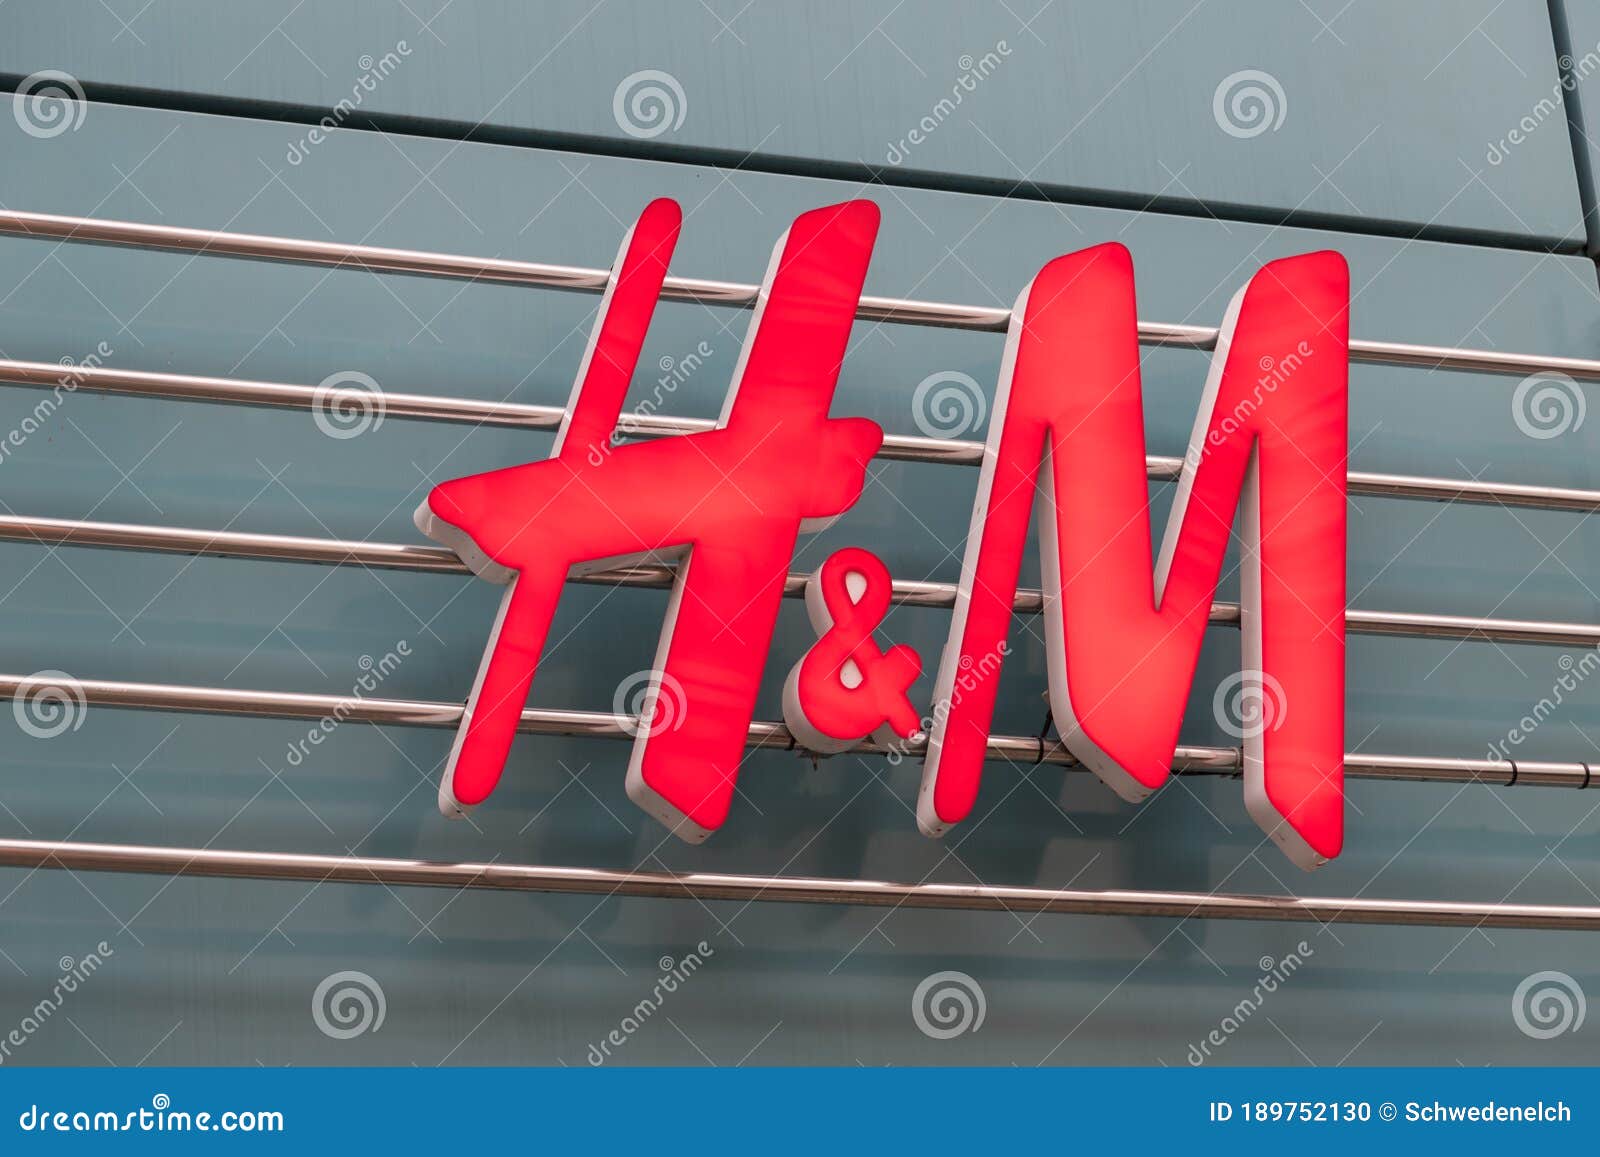 Logo and Inscription of a Textile Trading Company Editorial Image ...